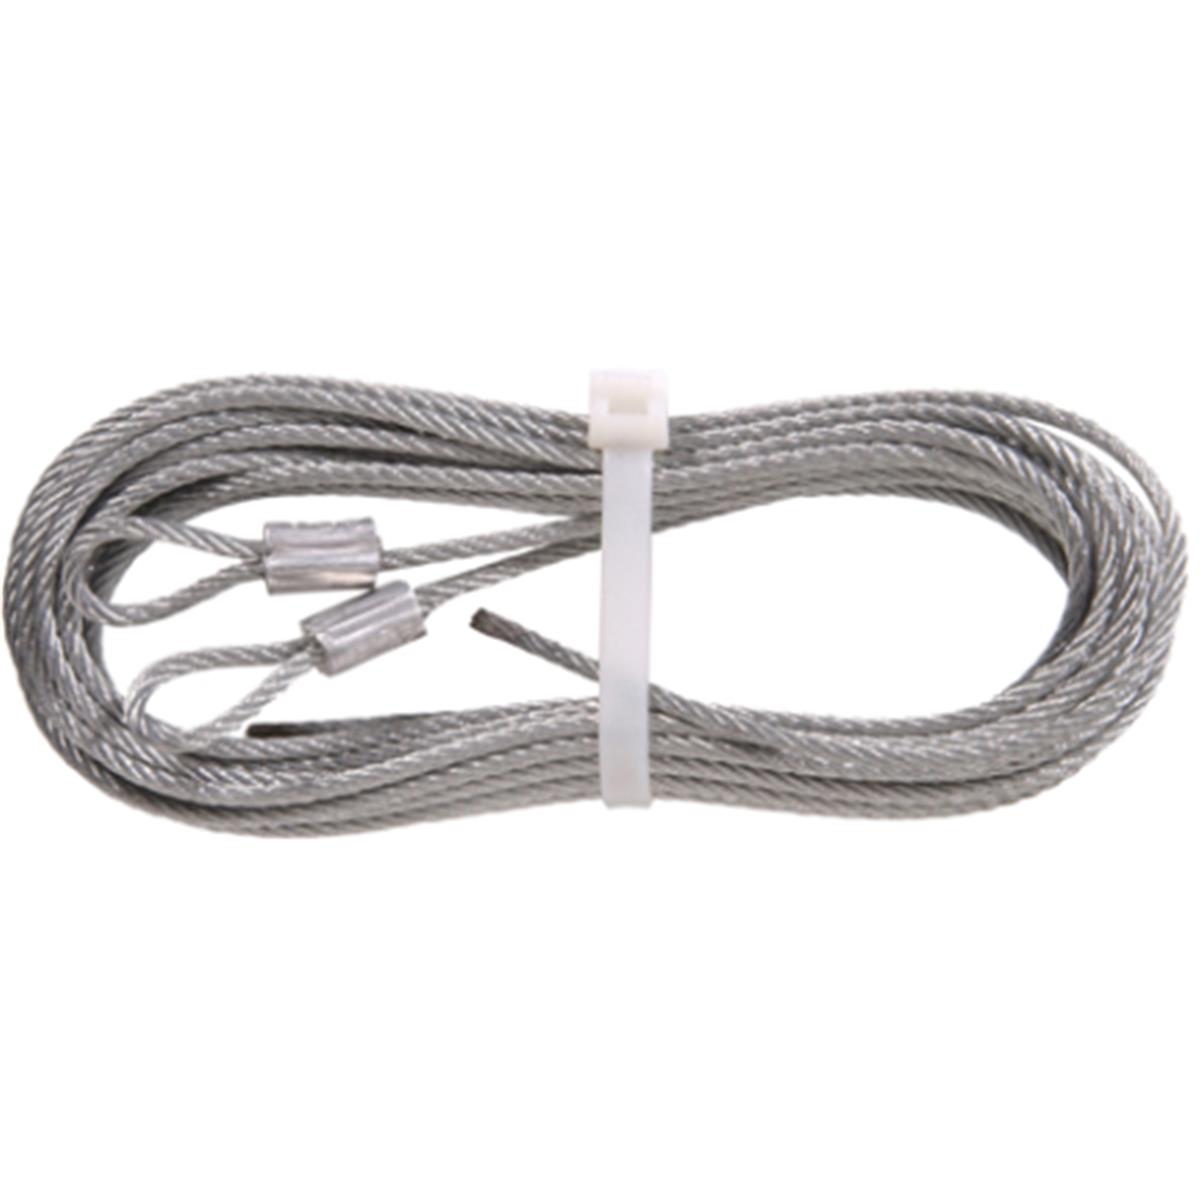 0.125 In. X 12 Ft. Extension Spring Lift Cable, Galvanized